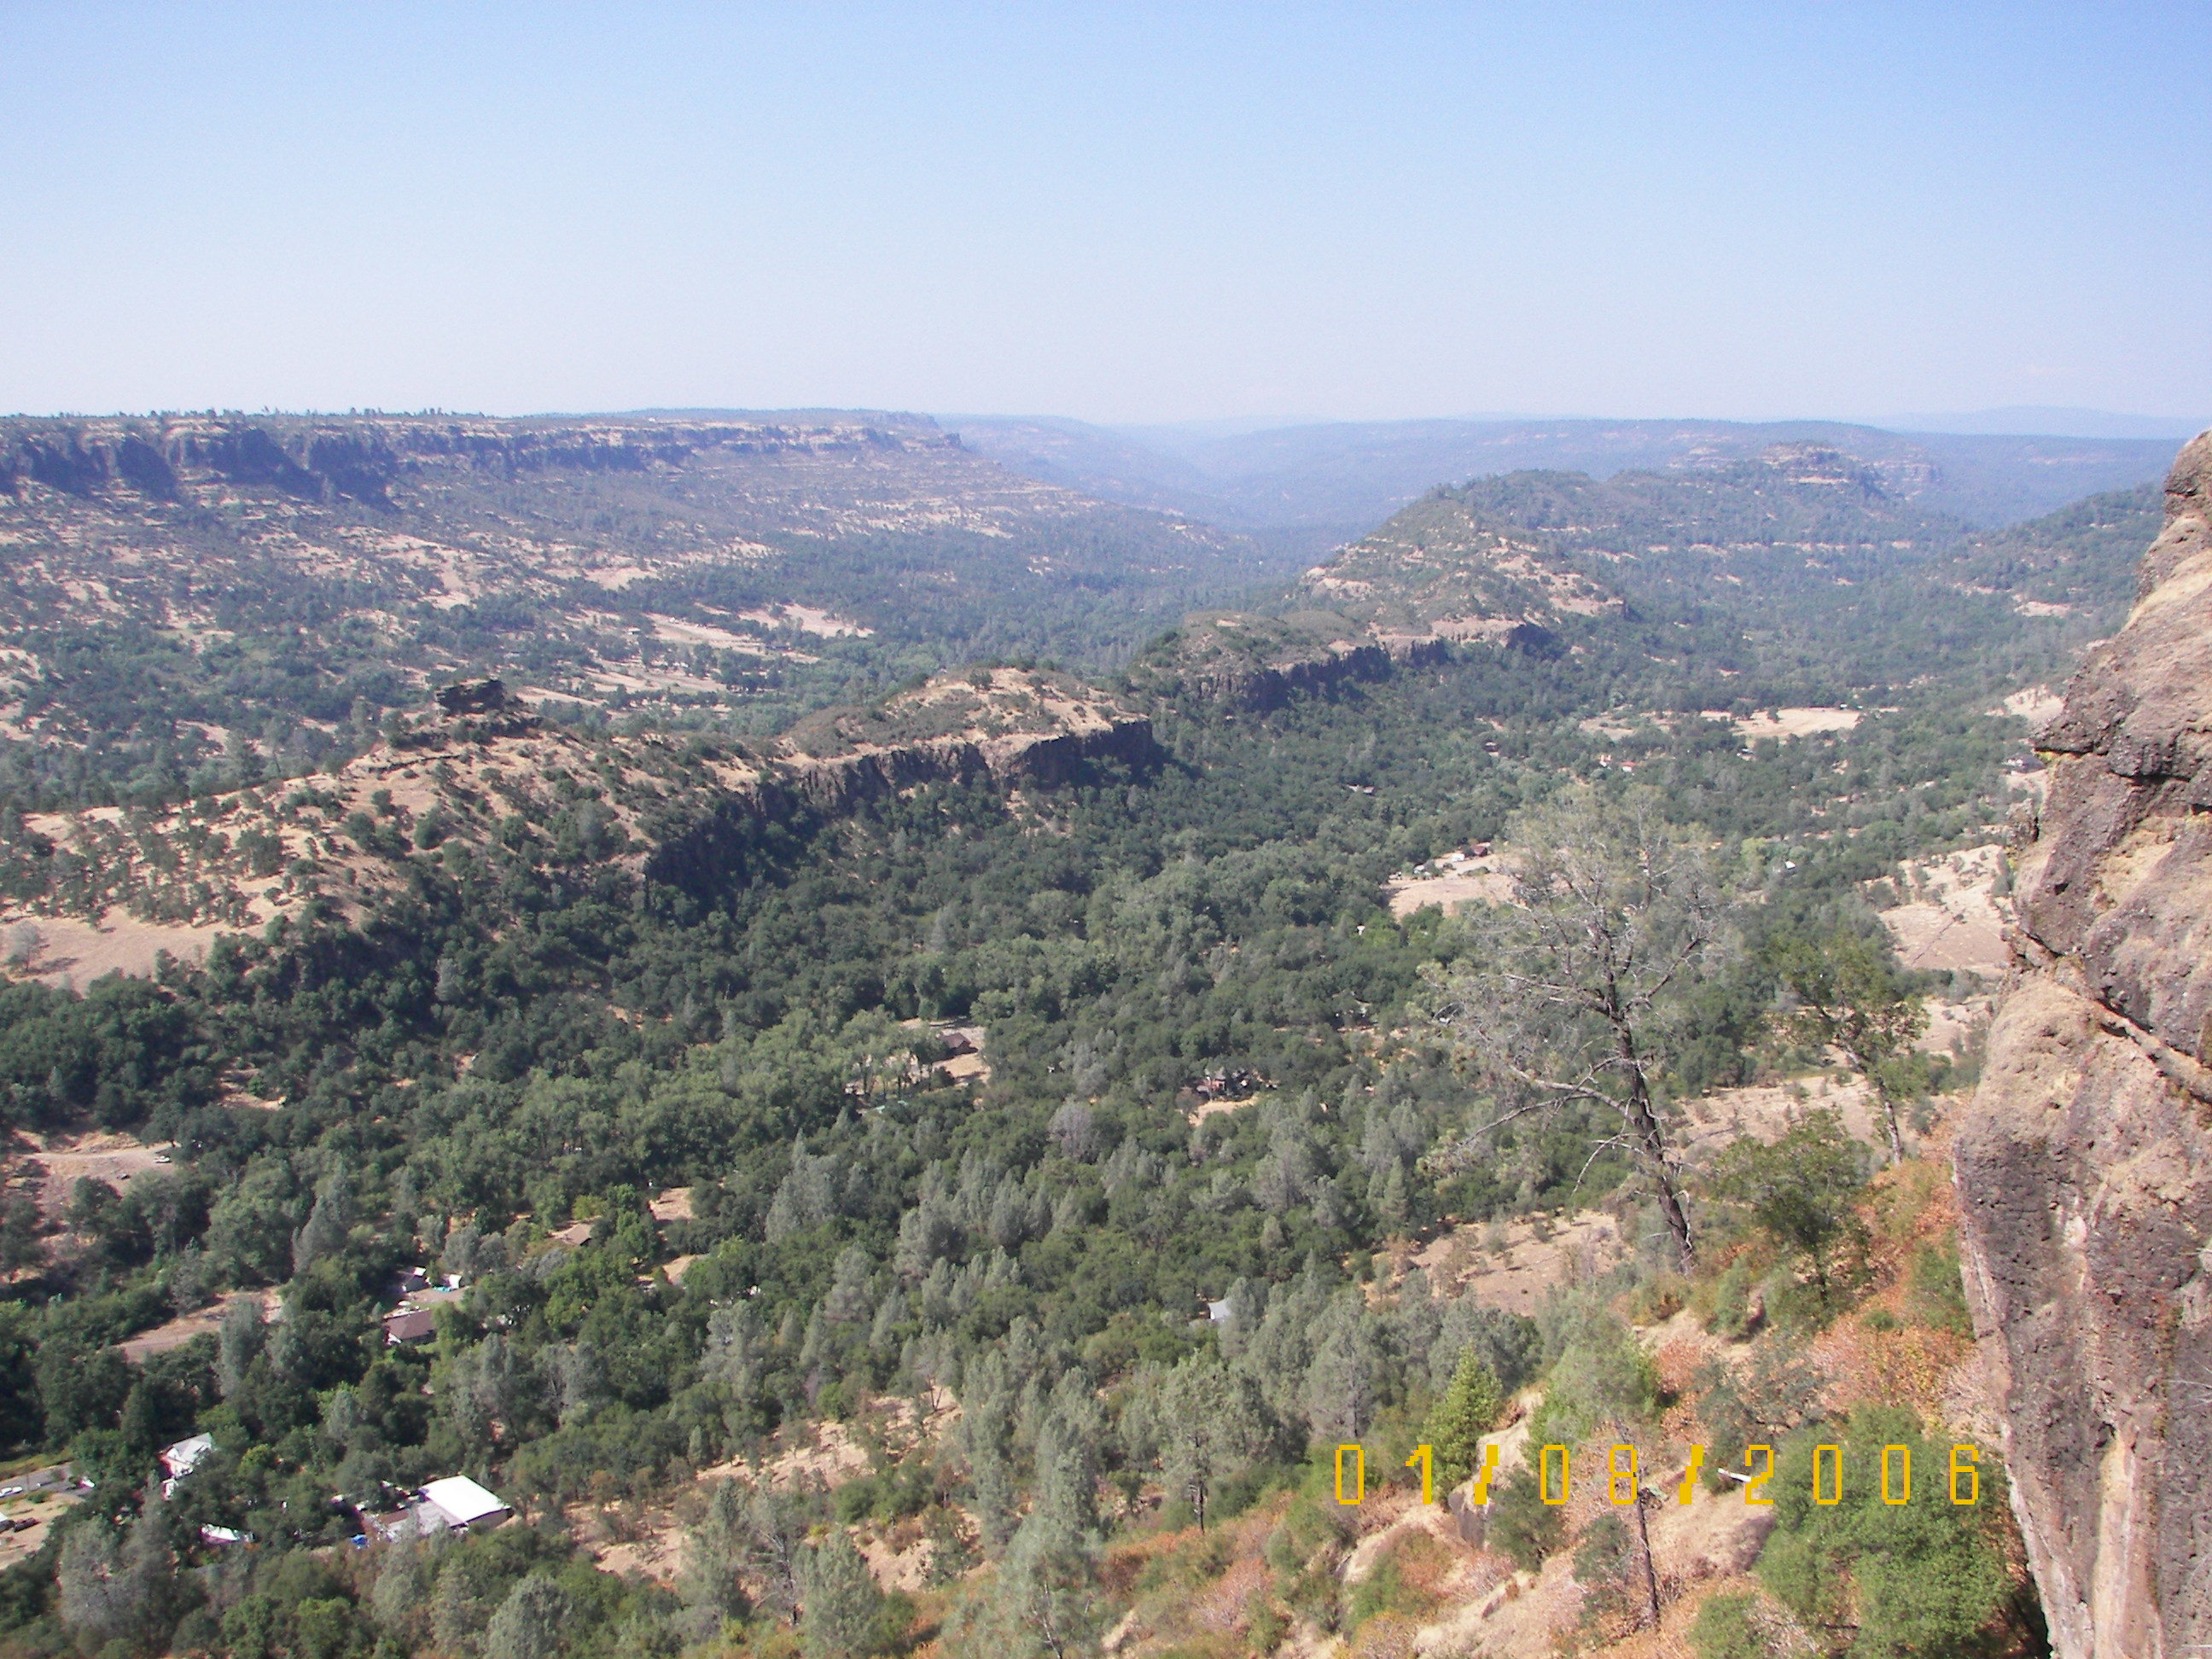 High vantage point showing buttes and valleys with vegetation